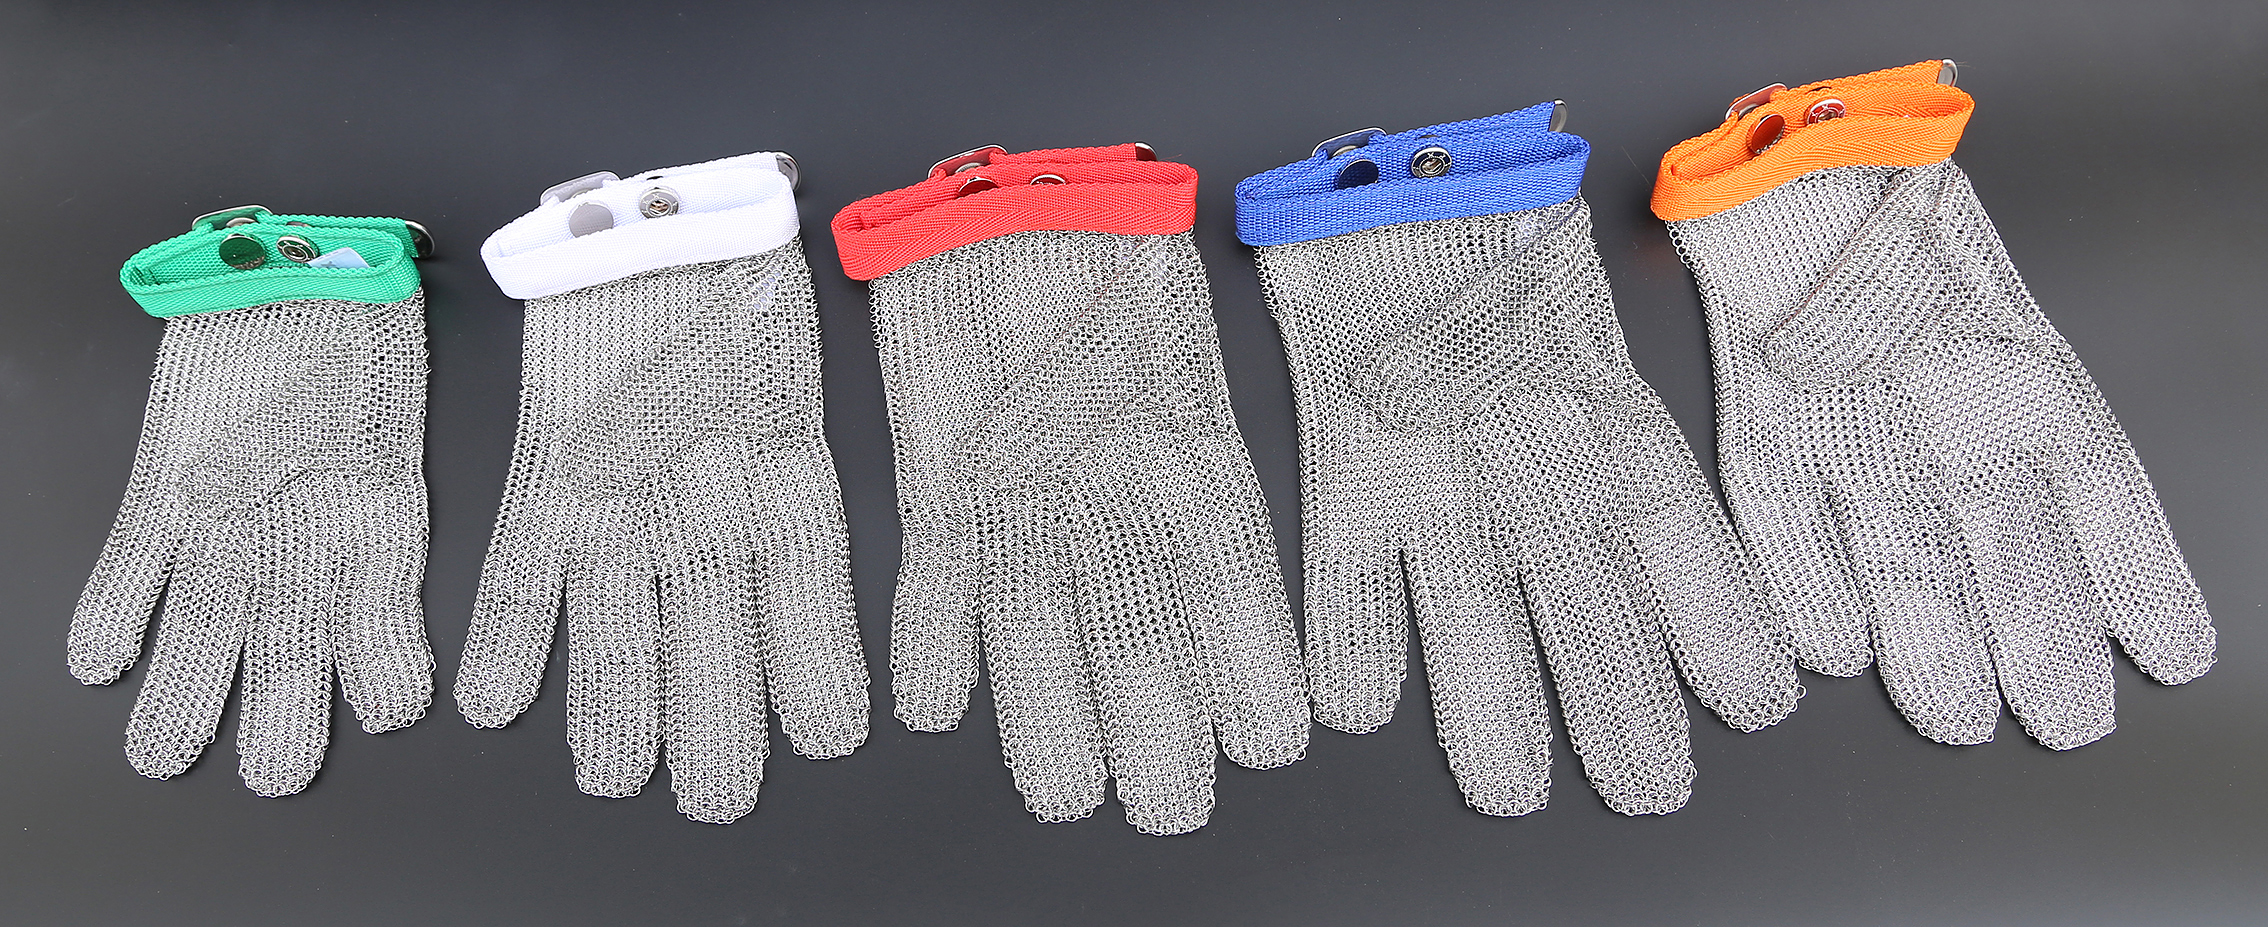 Main properties and use of stainless steel protective gloves